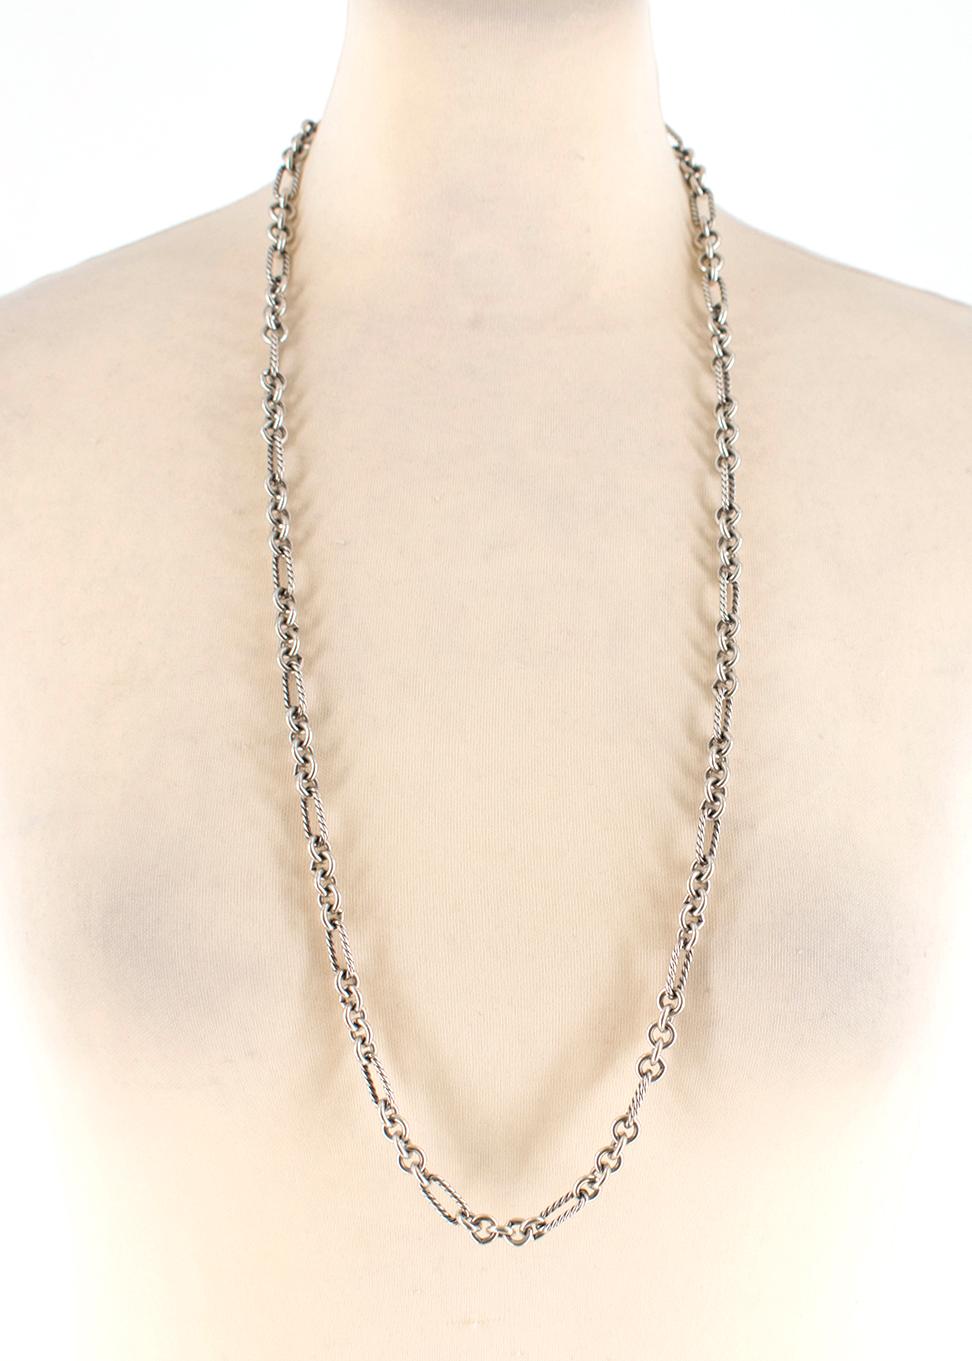 David Yurman designed Figaro necklace with his classic sterling silver rings, cable links, and signature toggle clasp.

Please note, these items are pre-owned and may show signs of
being stored even when unworn and unused. This is reflected within